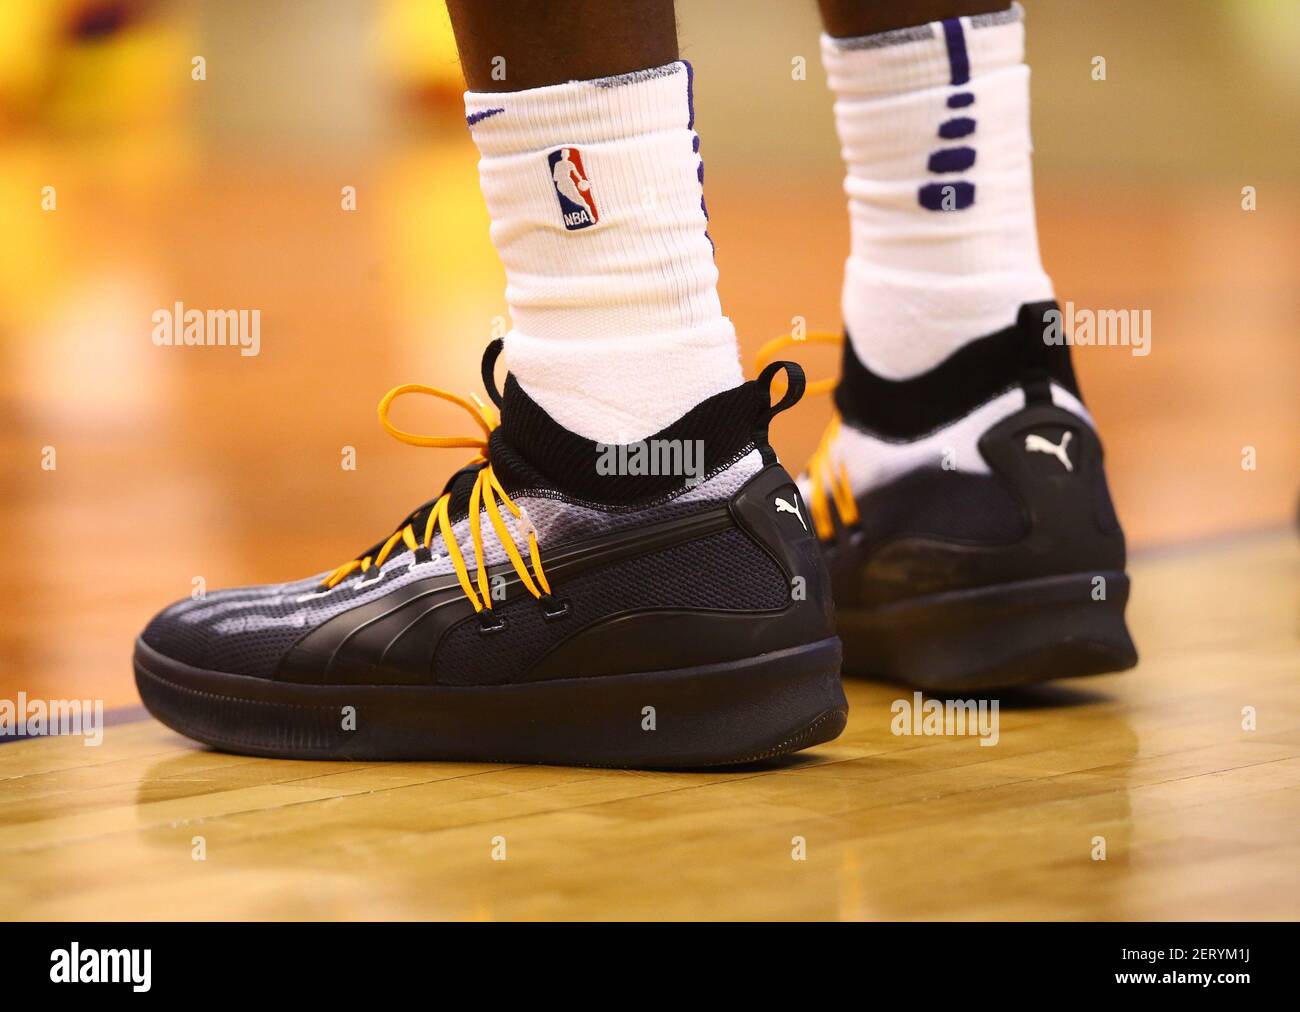 Oct 31, 2018; Phoenix, AZ, USA; Detailed view of the Puma basketball shoes  worn by Phoenix Suns center Deandre Ayton against the San Antonio Spurs in  the first half at Talking Stick